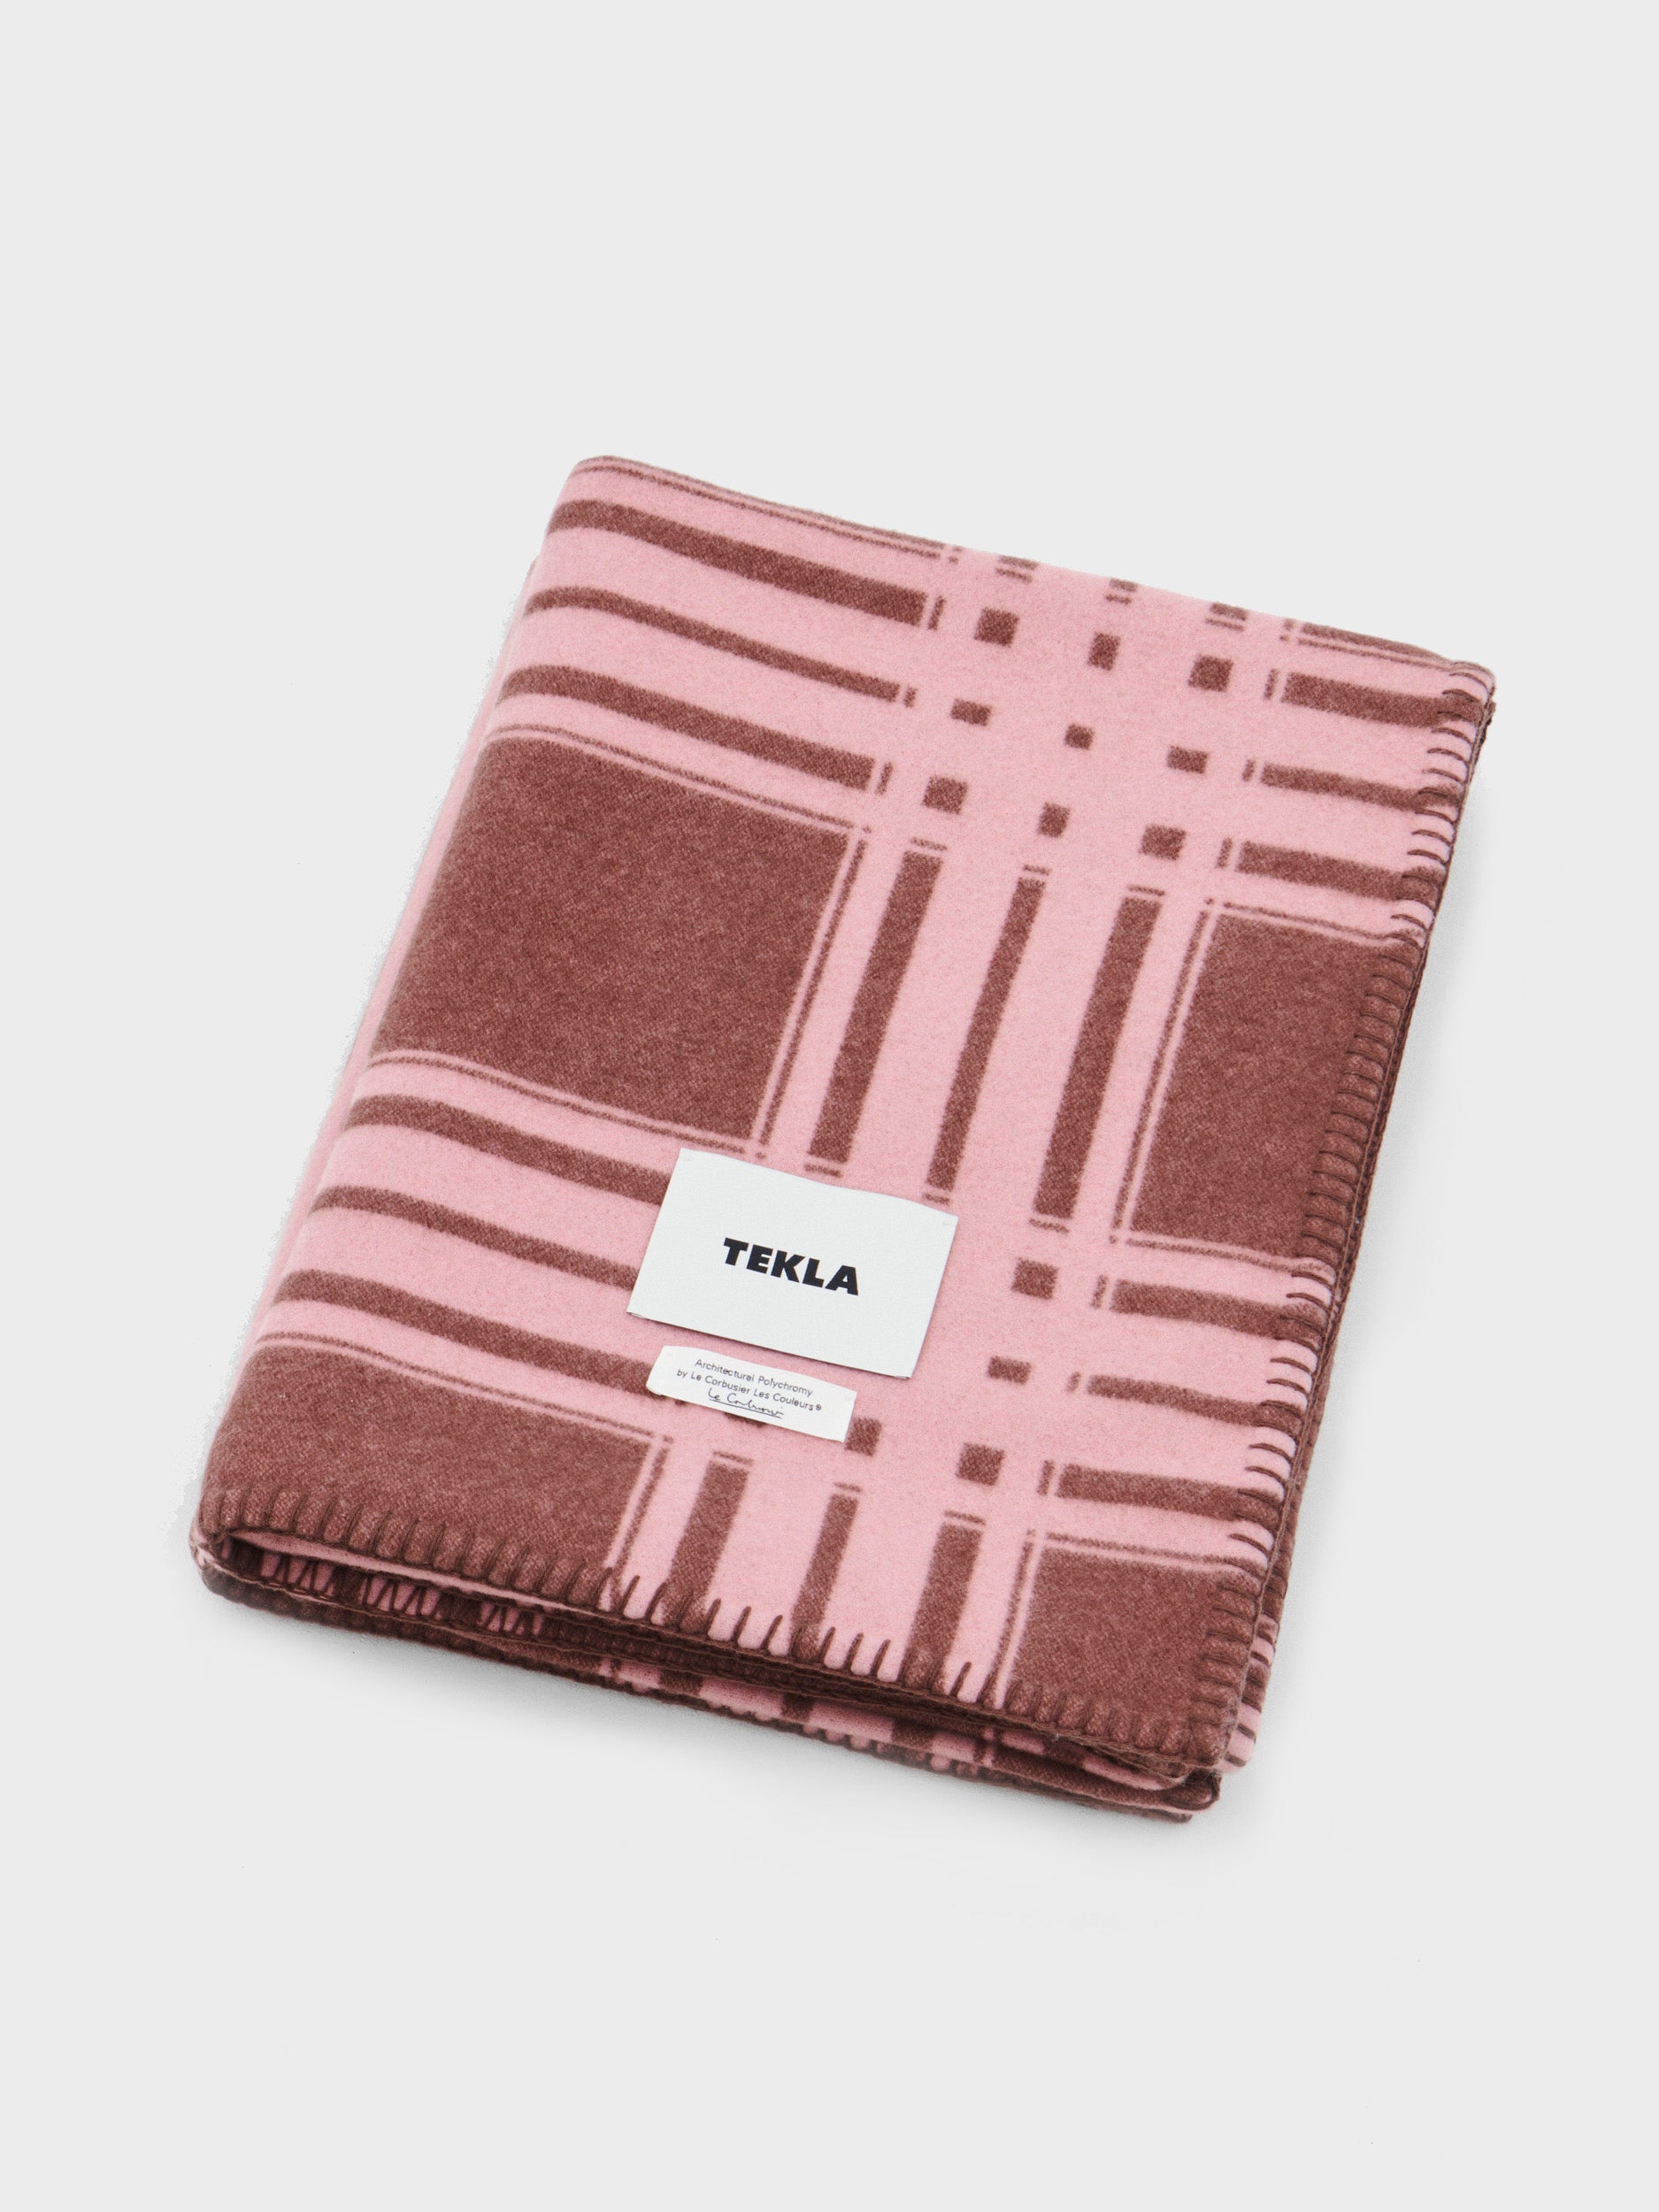 Tekla - Cashmere and Lambswool Blanket in Terre Sienne Brulee and Rose Vif